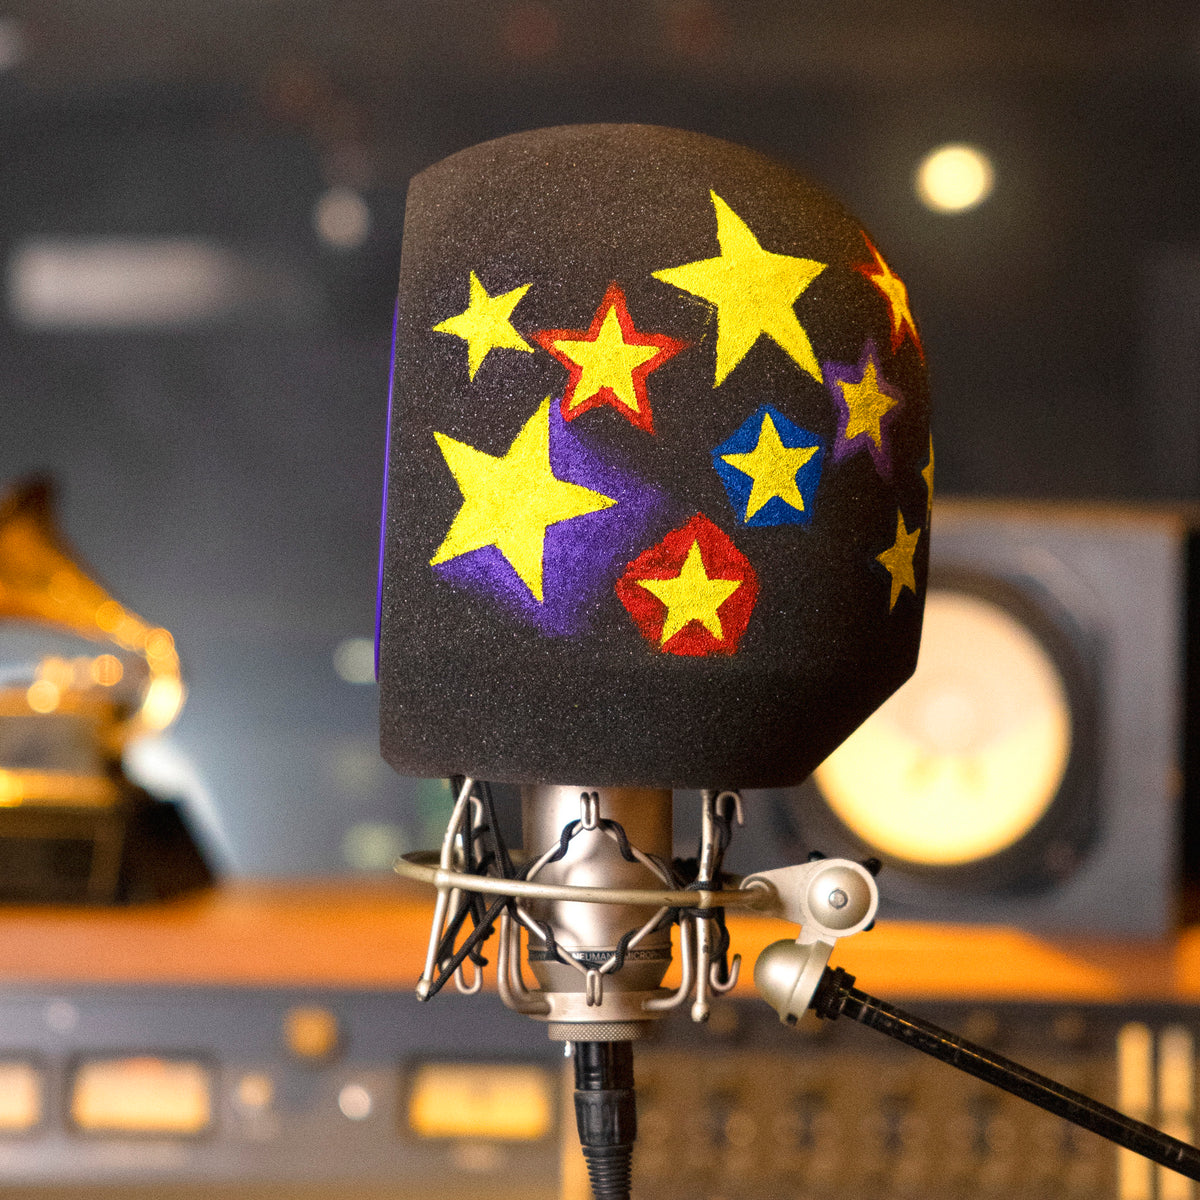 Comet Pro Microphone Isolation Shield with hand painted yellow blue red stars in studio background